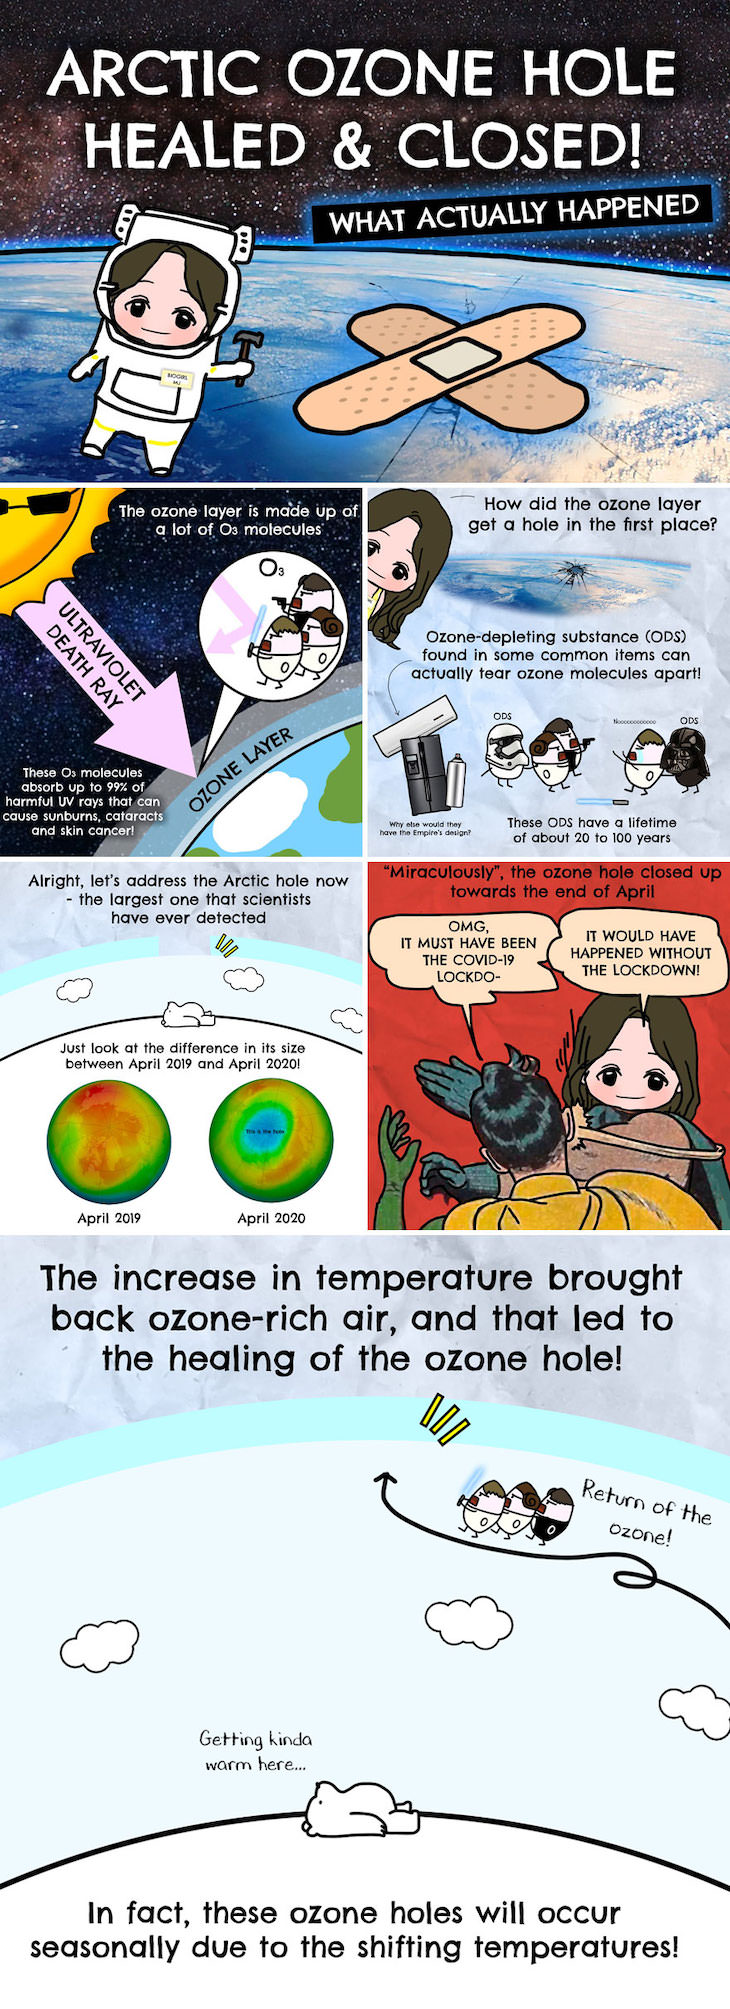 Illustrations of Fascinating Facts About the World, The arctic ozone hole